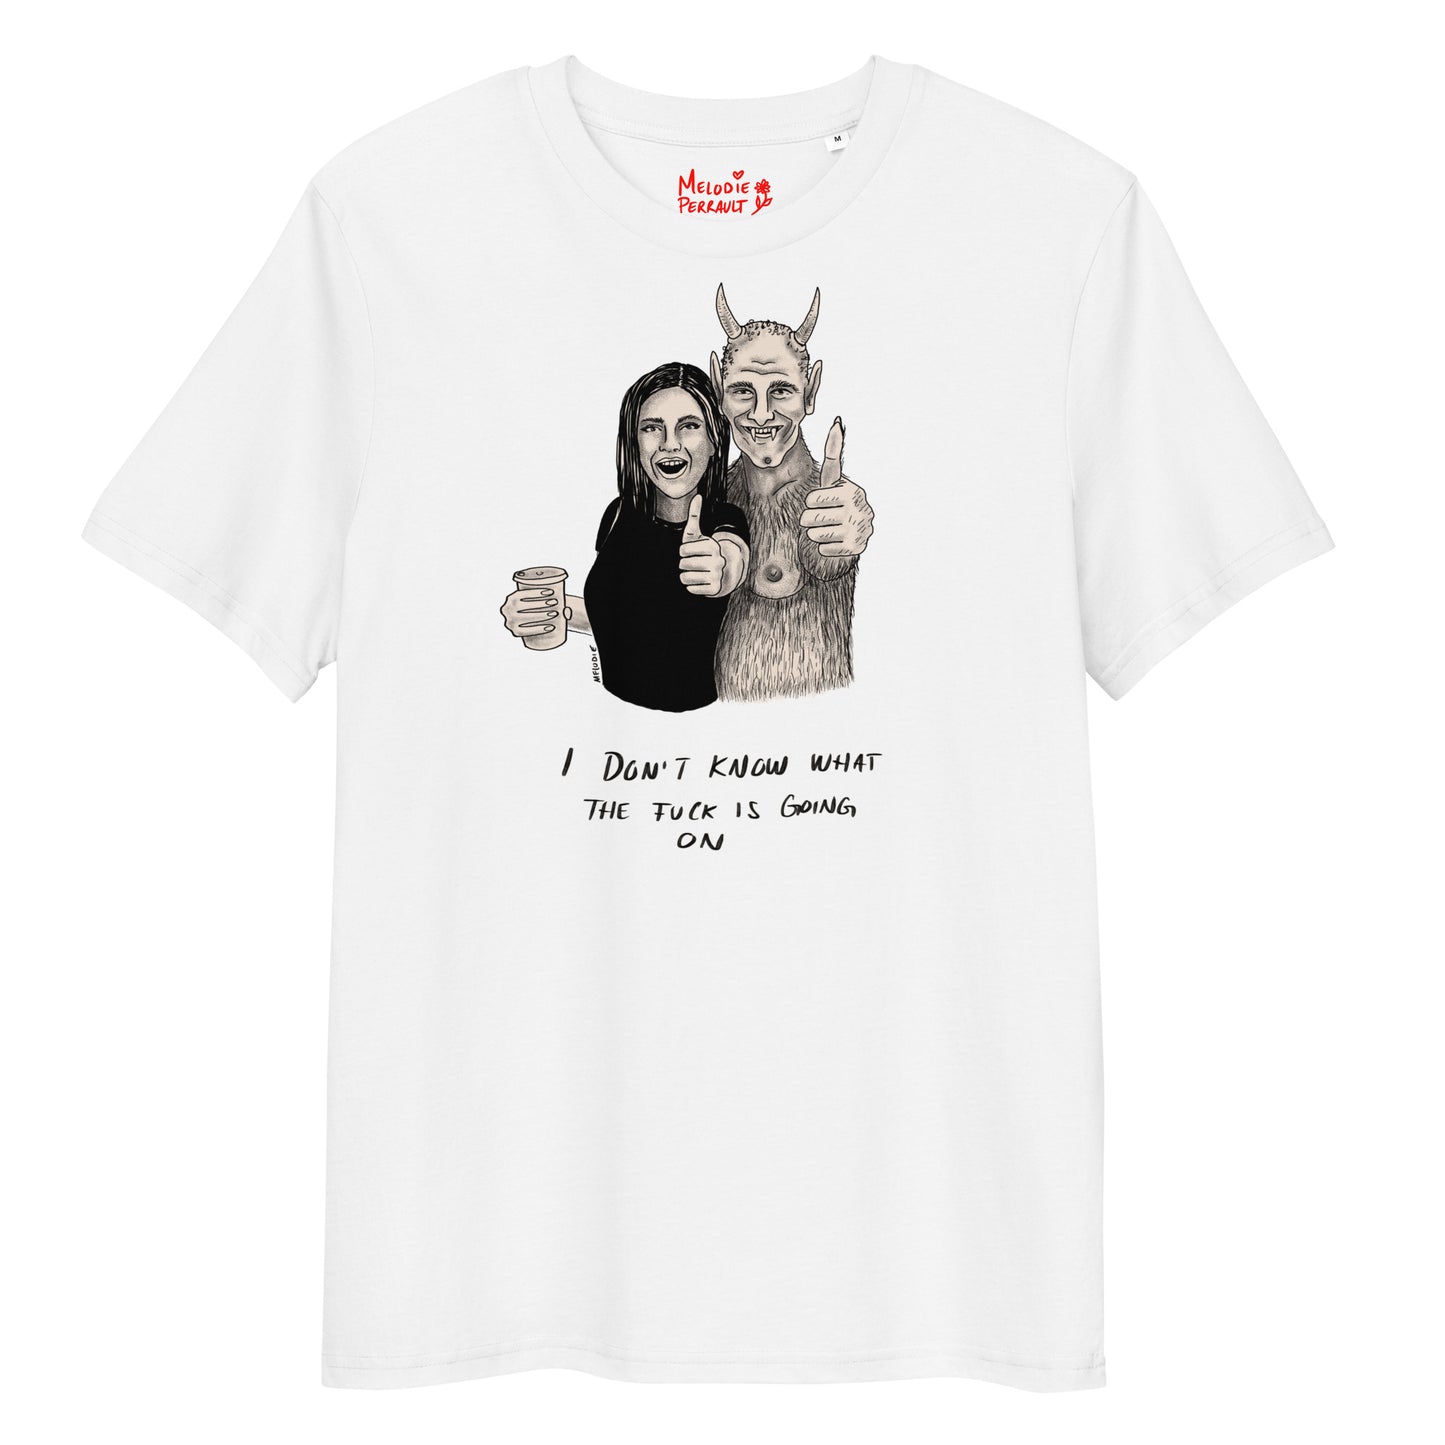 " I Don’t Know What The Fuck Is Going On " Unisex organic cotton t-shirt